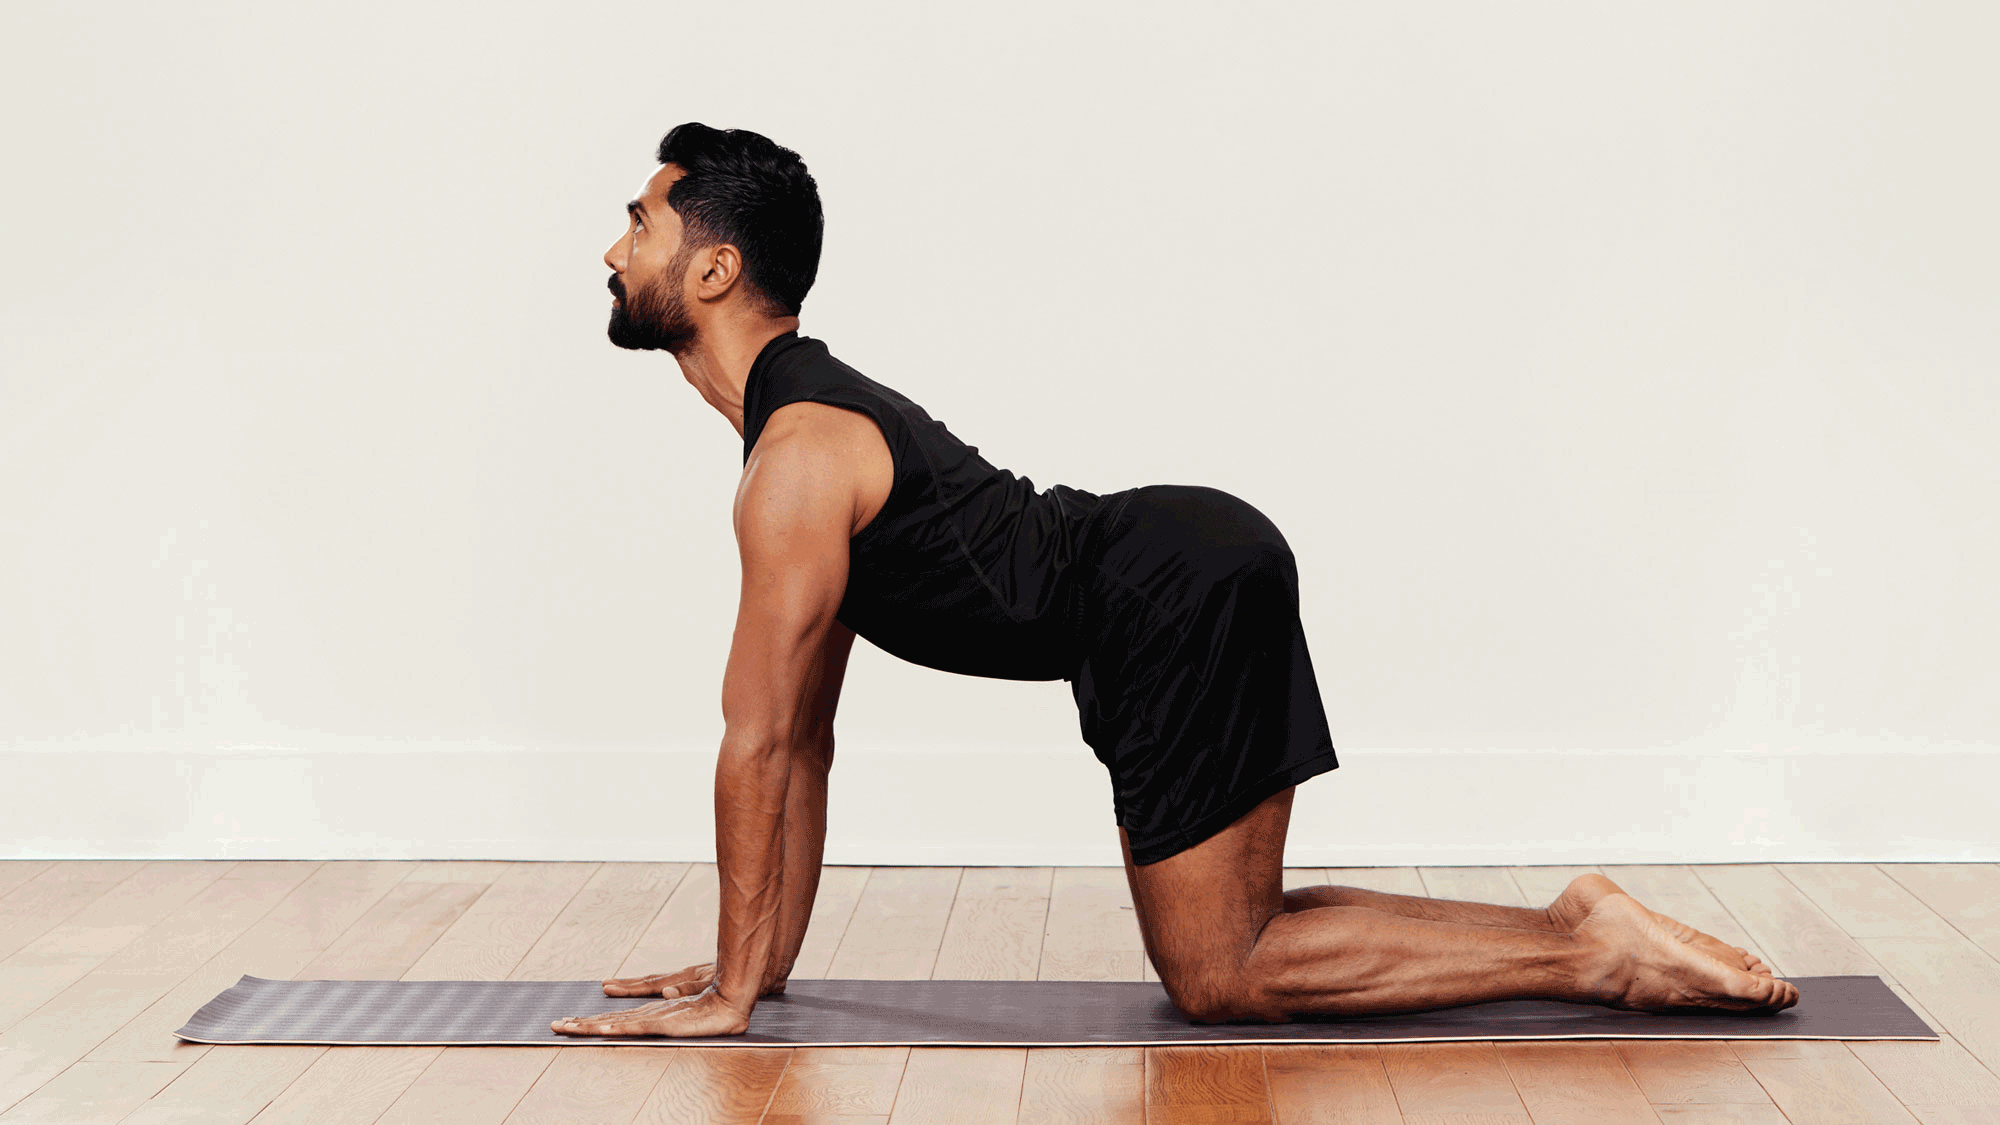 10 Sleep-Inducing Stretches to Do Before Bed